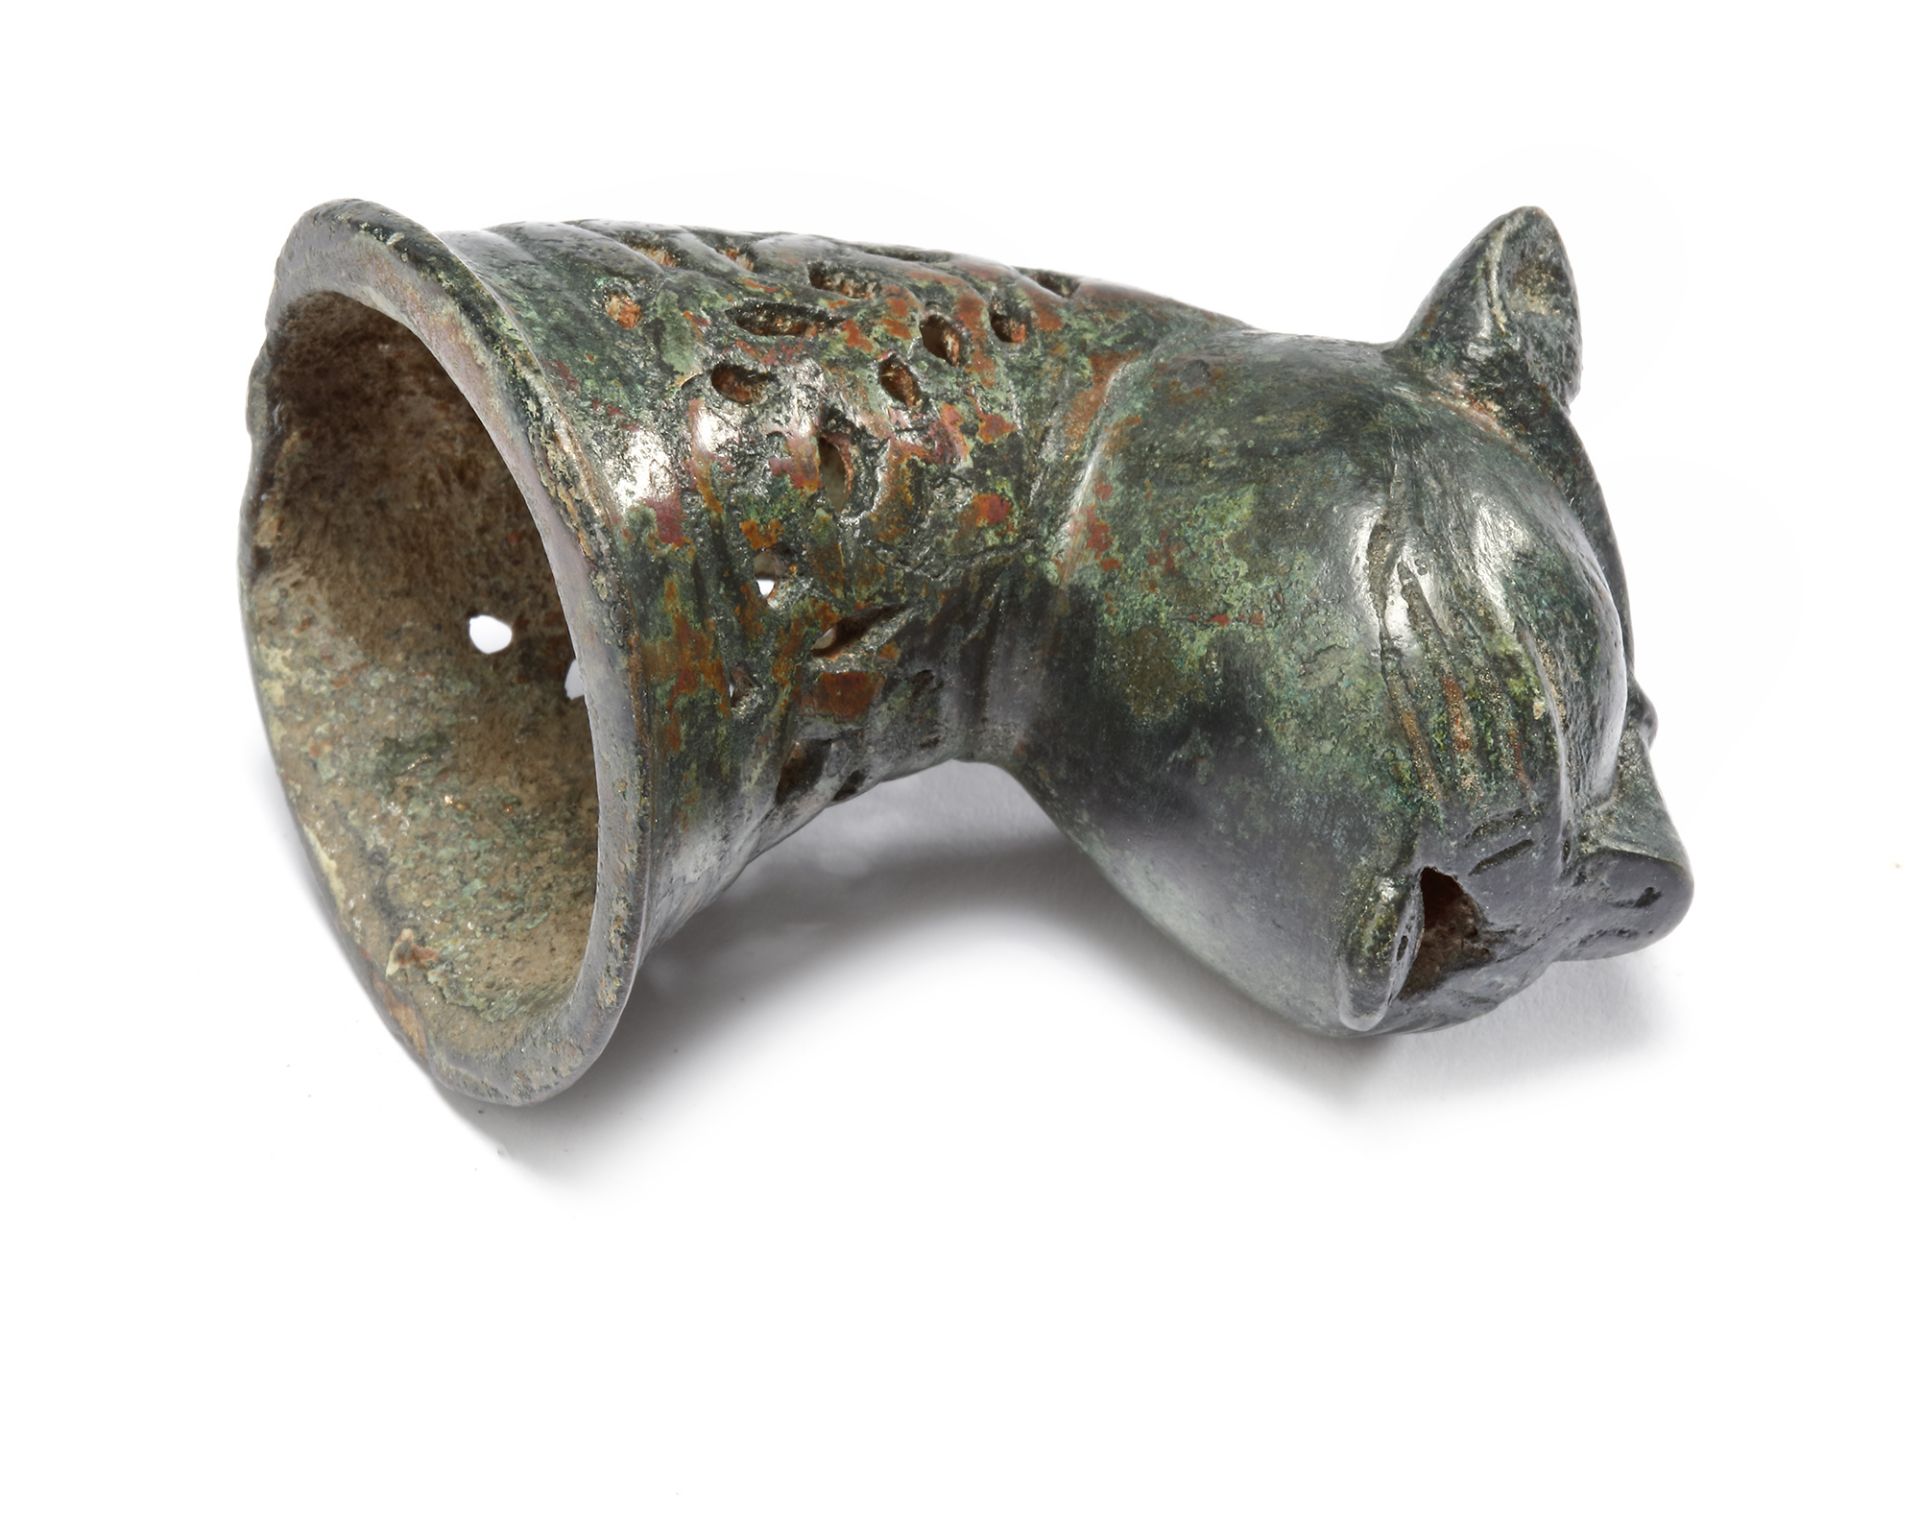 A FINE CAST BRONZE LION HEAD, FROM AN INCENSE BURNER, KHORASAN, 11TH-12TH CENTURY - Image 7 of 8